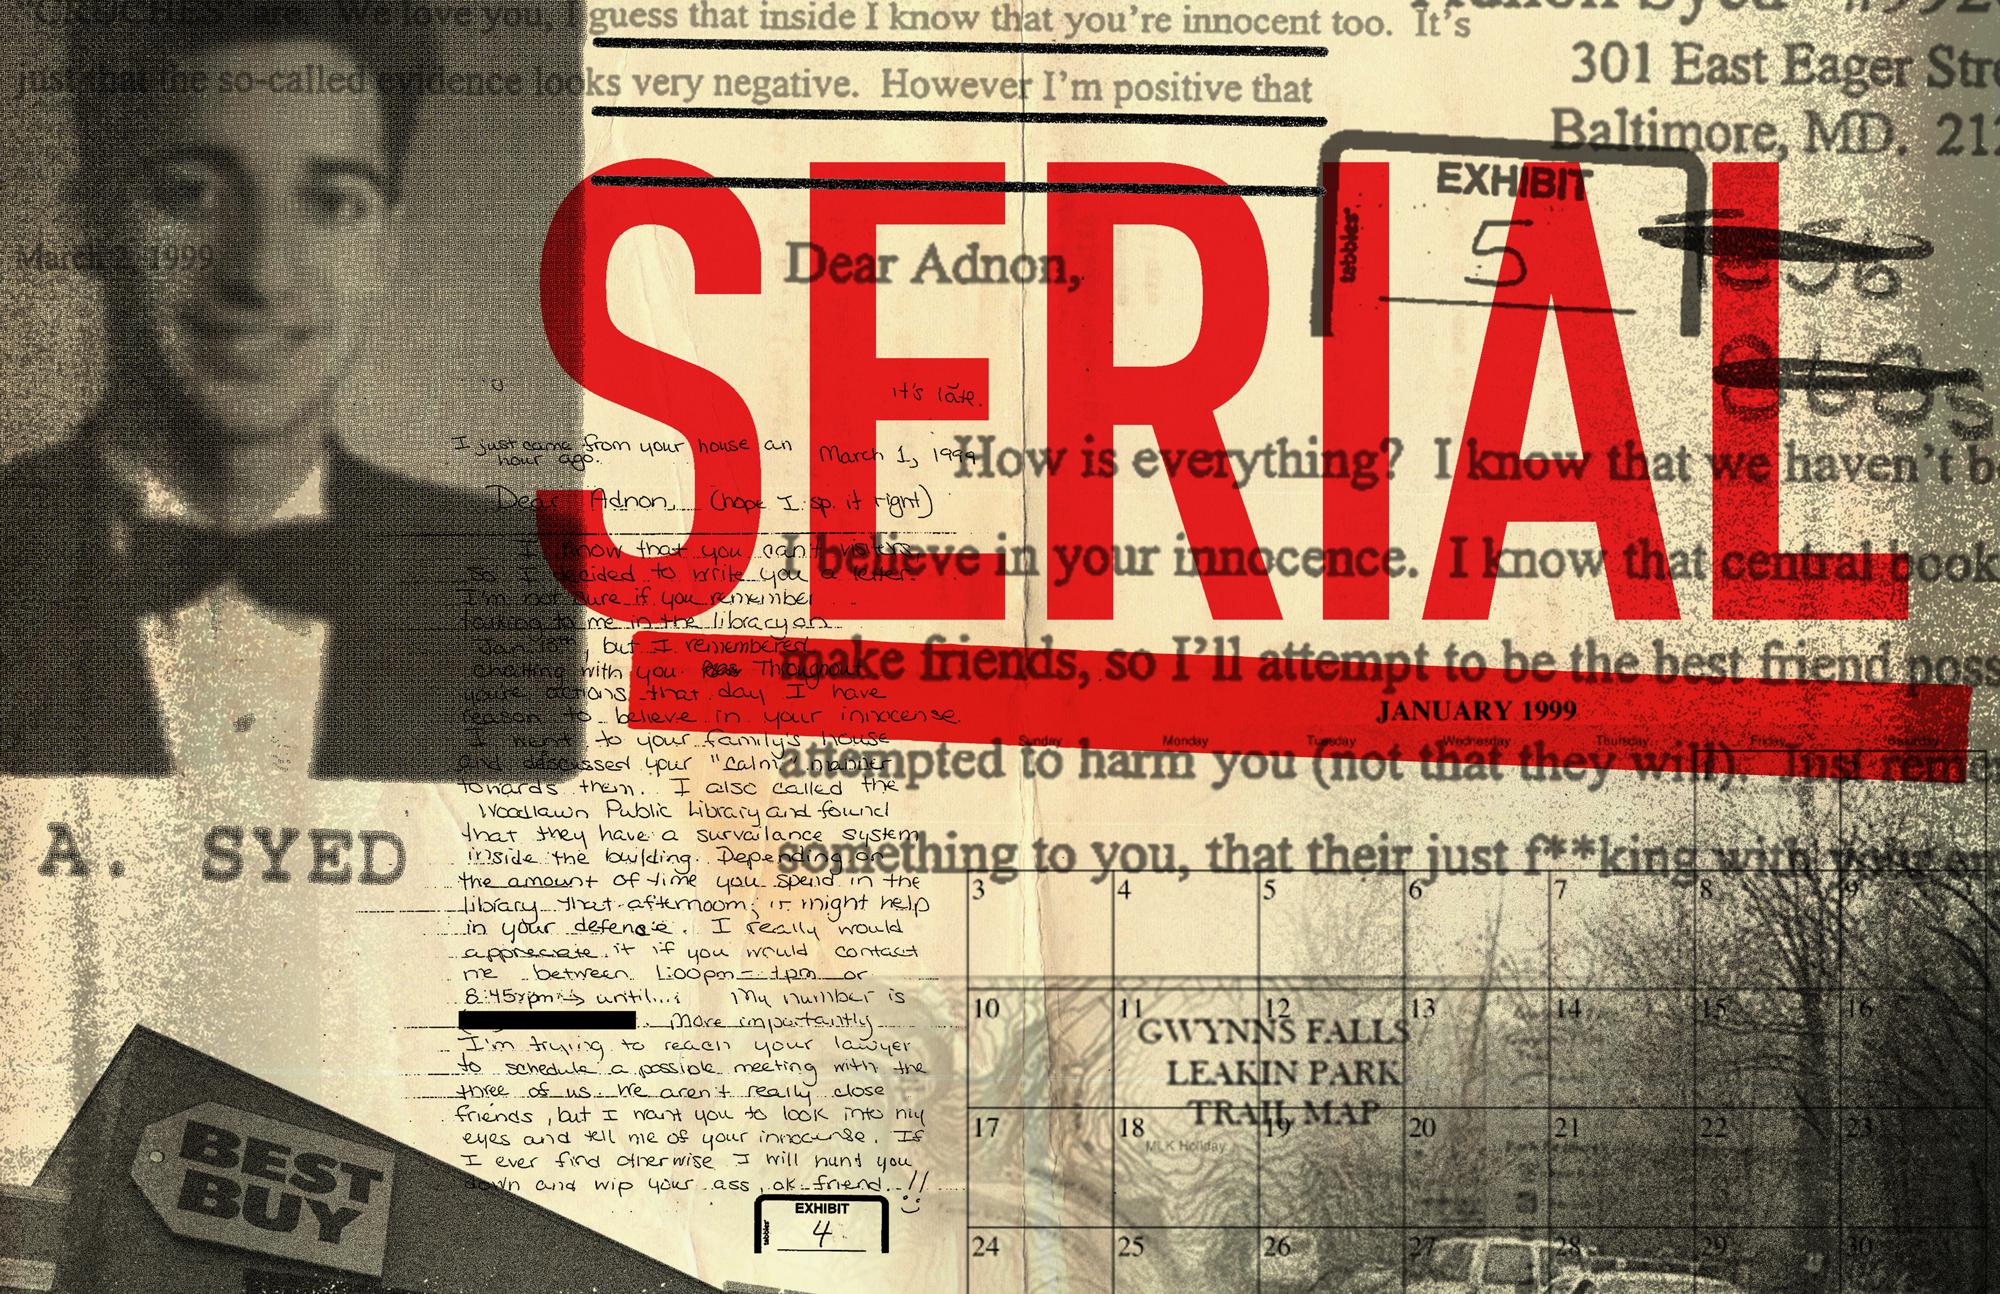 12 Questions That Still Plague Me After Listening To The Final Episode Of The Podcast, Serial. *SPOILER ALERT